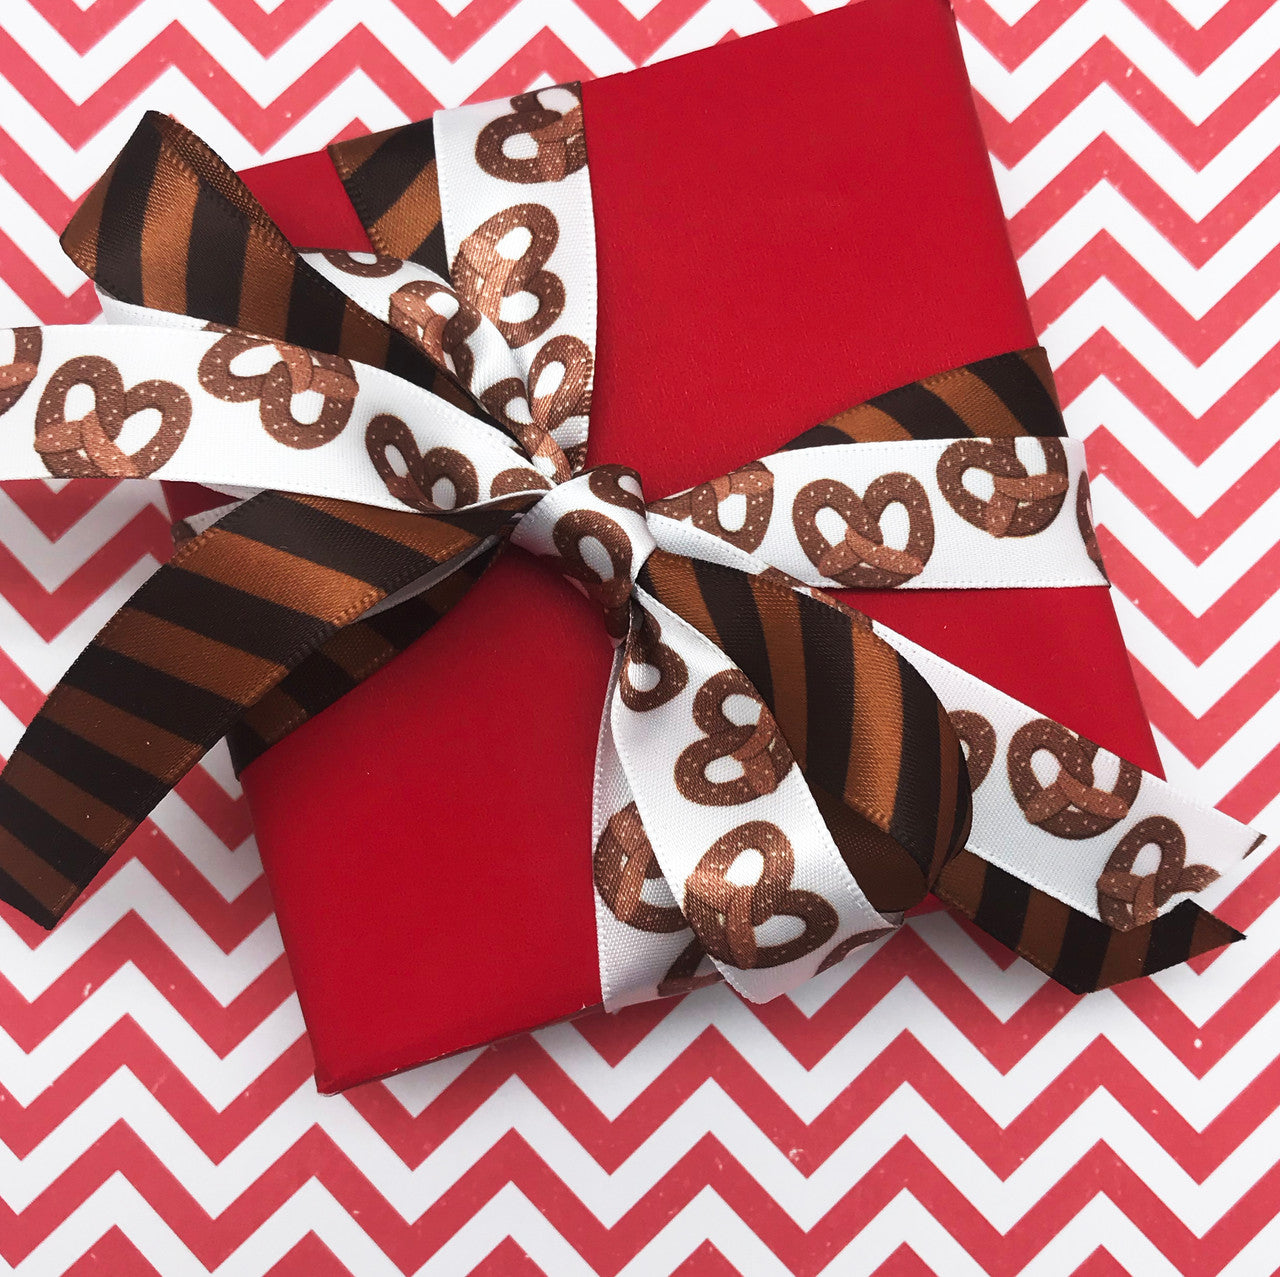 Who doesn't like sweet and salty? Pair our chocolate stripes with pretzels for fun party favors!